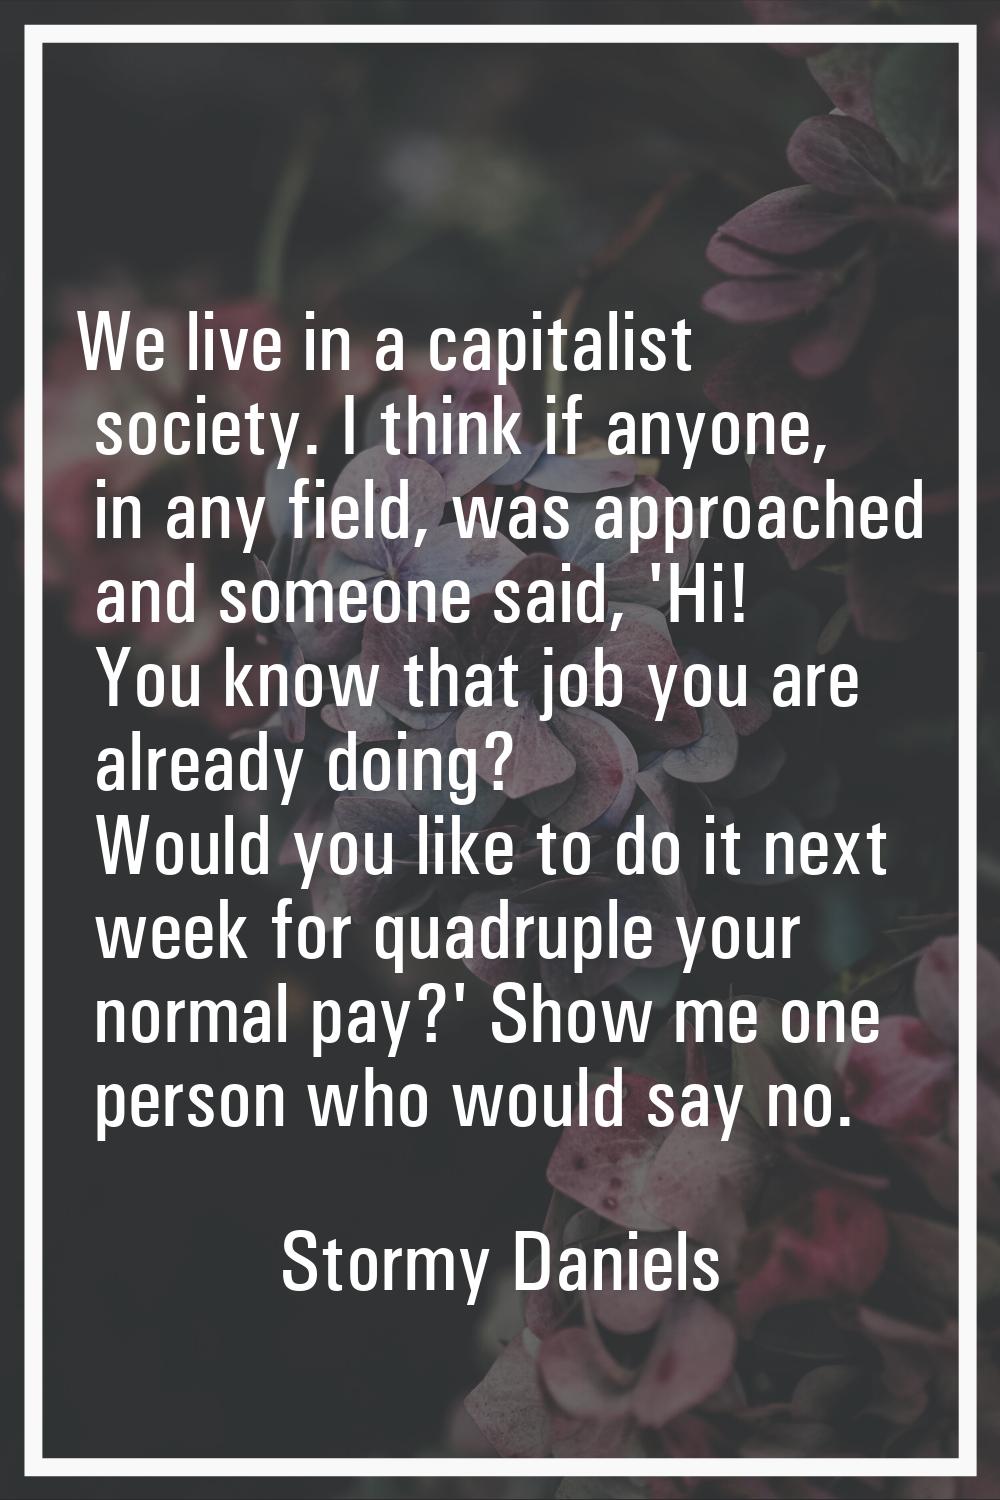 We live in a capitalist society. I think if anyone, in any field, was approached and someone said, 